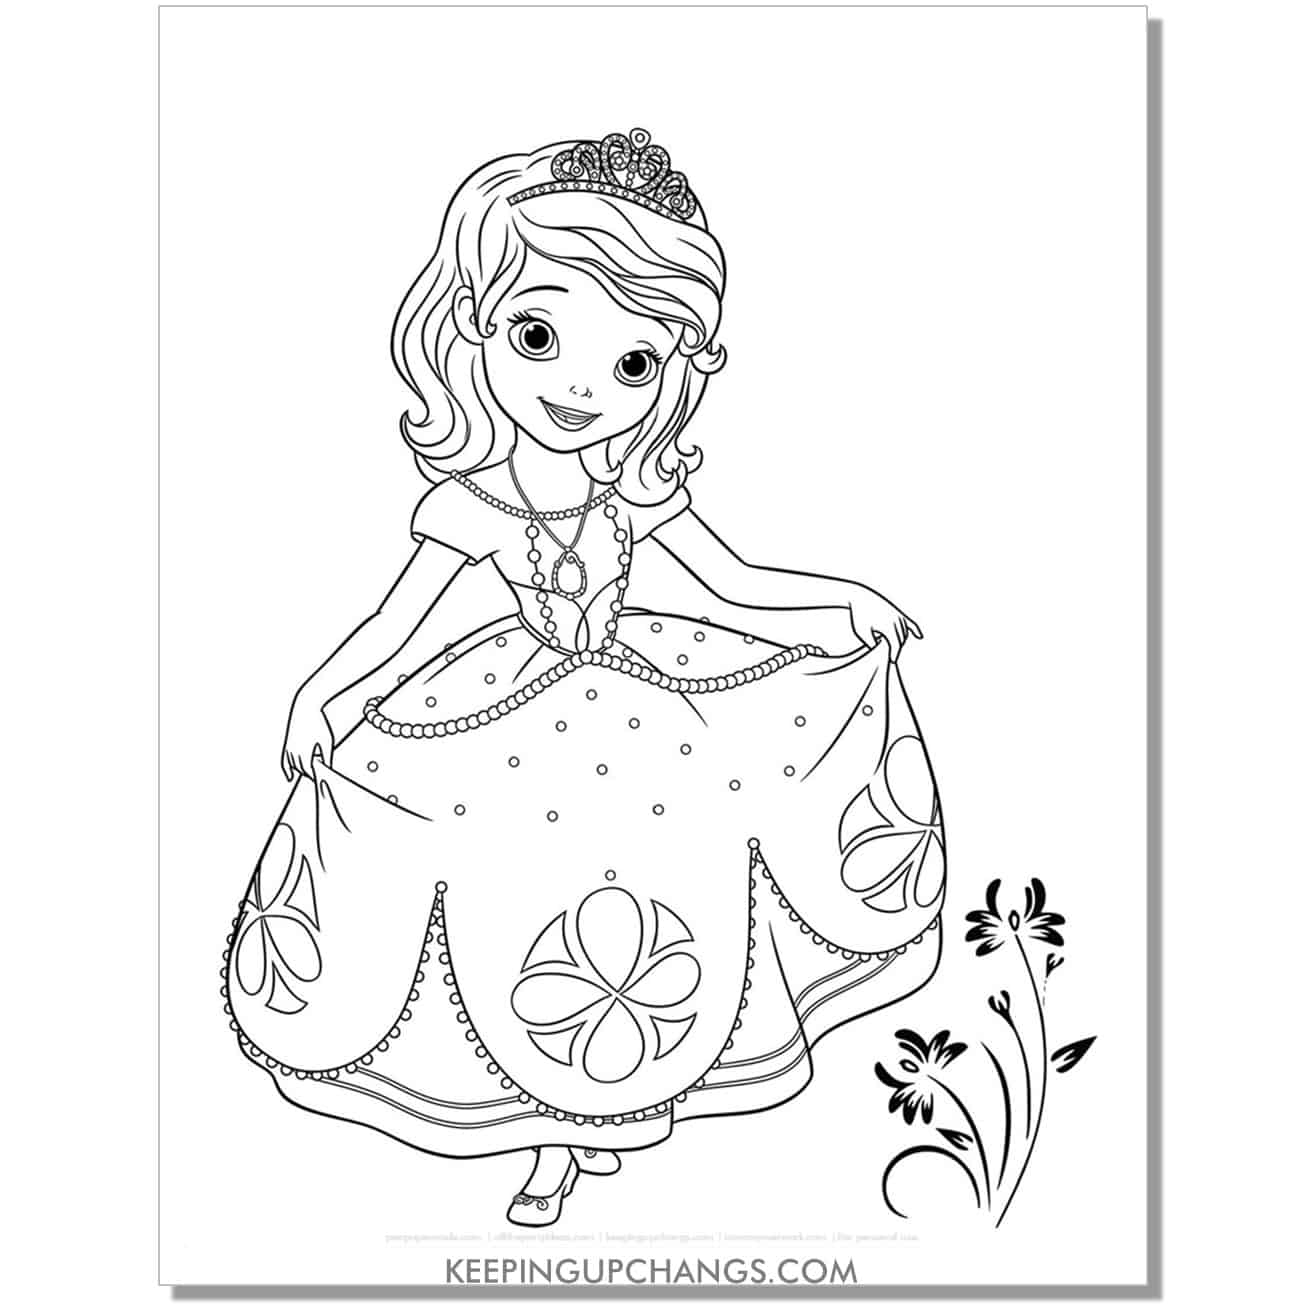 princess sofia the first doing a curtsy coloring page, sheet.